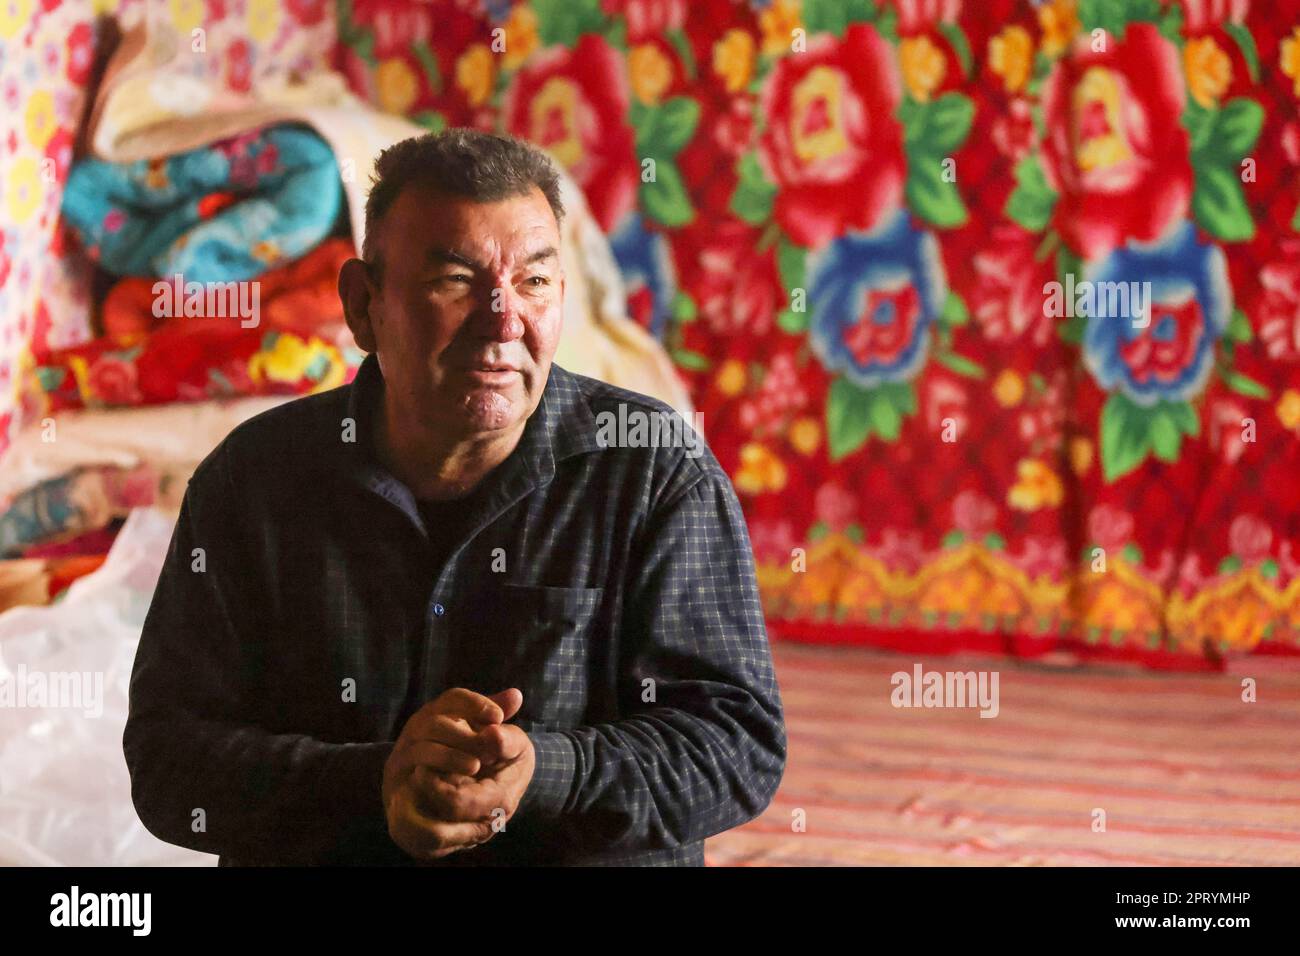 (230427) -- YULI, April 27, 2023 (Xinhua) -- Arkin Reyim talks with his family members in Yuli County, northwest China's Xinjiang Uygur Autonomous Region, April 1, 2023.  Arkin Reyim is a 51-year-old cotton farmer with more than 300 mu (20 hectares) of cotton fields in the Bax Mali Village of Yuli County in Xinjiang.     Arkin's courage and unique vision has prompted him to start growing cotton in 2004 when he got married with his wife Hasiyat Kasim. Since then, Arkin has devoted himself into the cultivation of cotton for over 10 years, thus making him an experienced cotton grower in the count Stock Photo